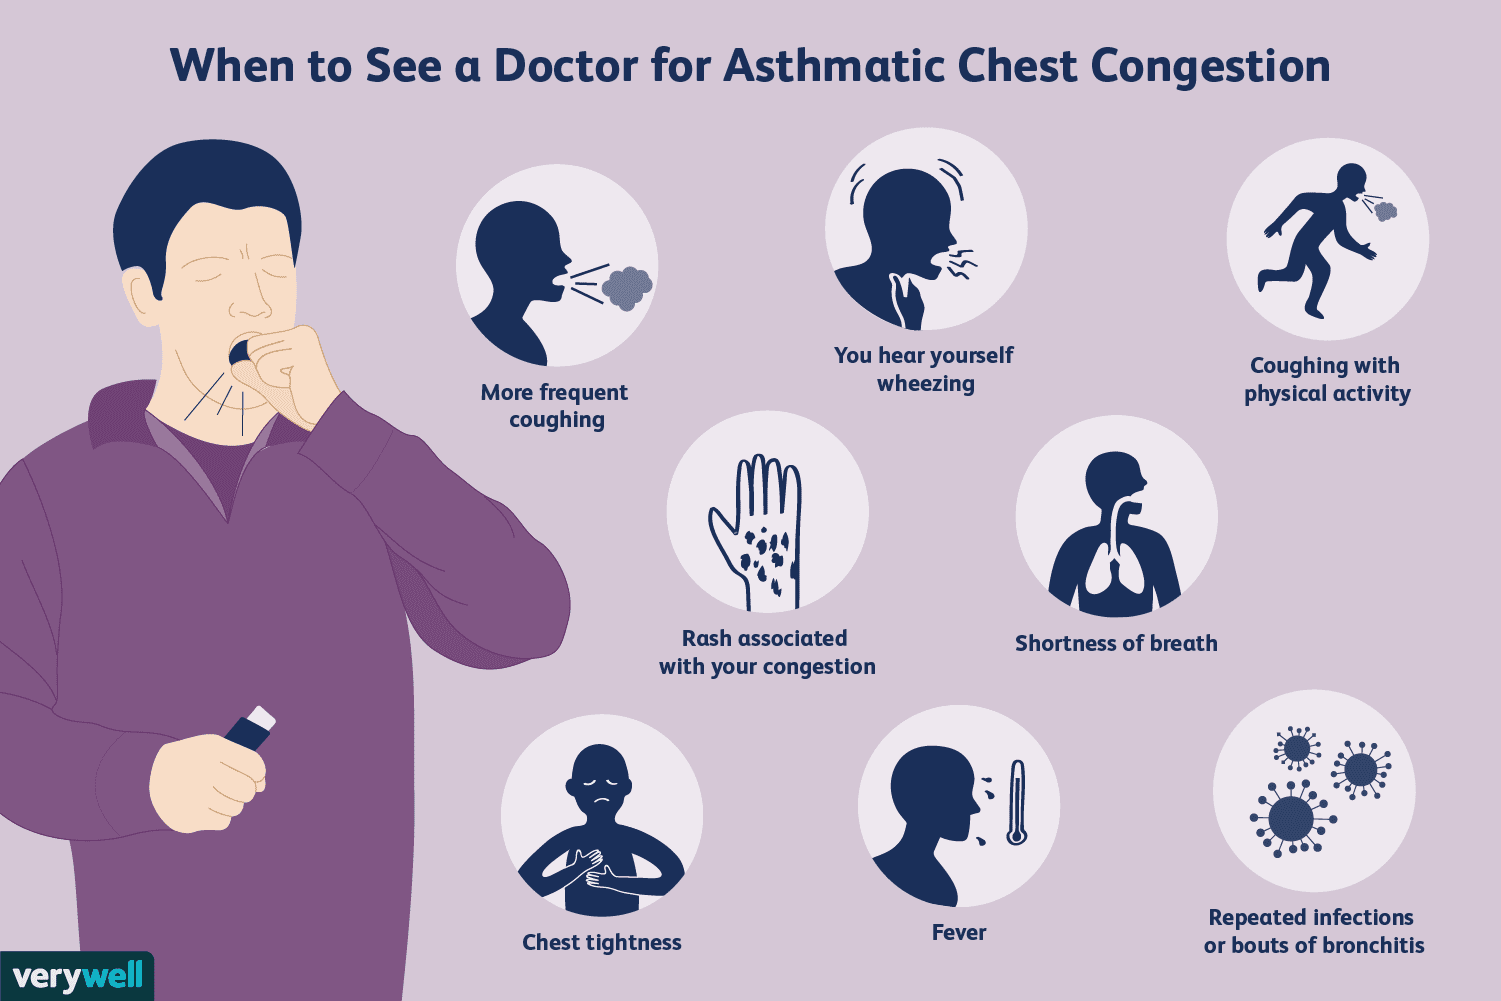 Chest Congestion in Asthma: Overview and More